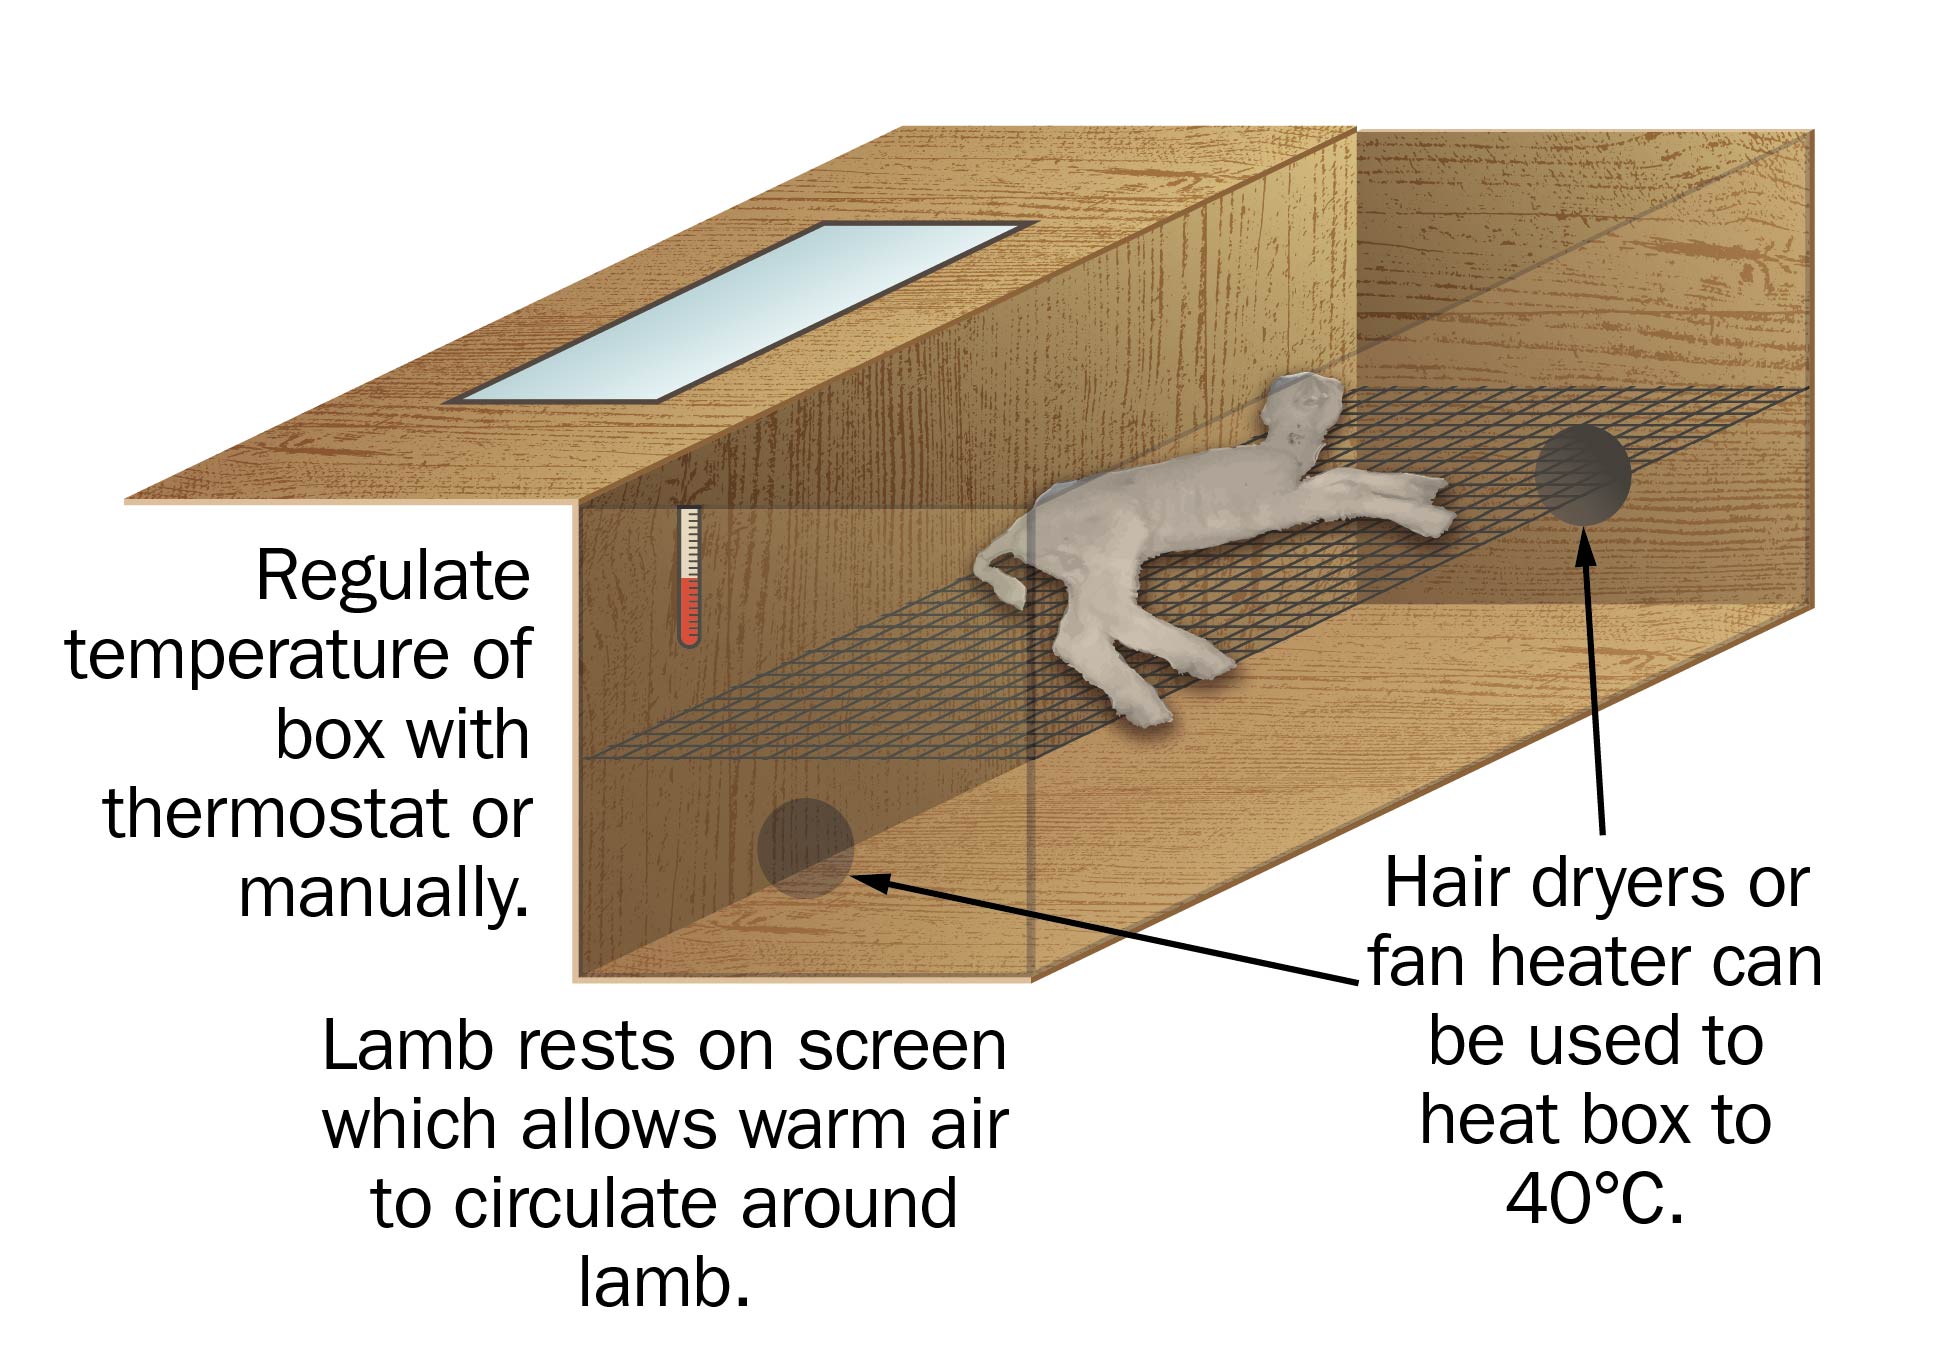 Lamb warming box schematic showing placement of lamb and heaters. Rectangular box with two black circles on short ends where hair dryers or fan heater can be inserted to heat box to 40°C. Lamb is resting on screen mid-way up so air can circulate around the lamb. Thermostat is attached to the side of the box.